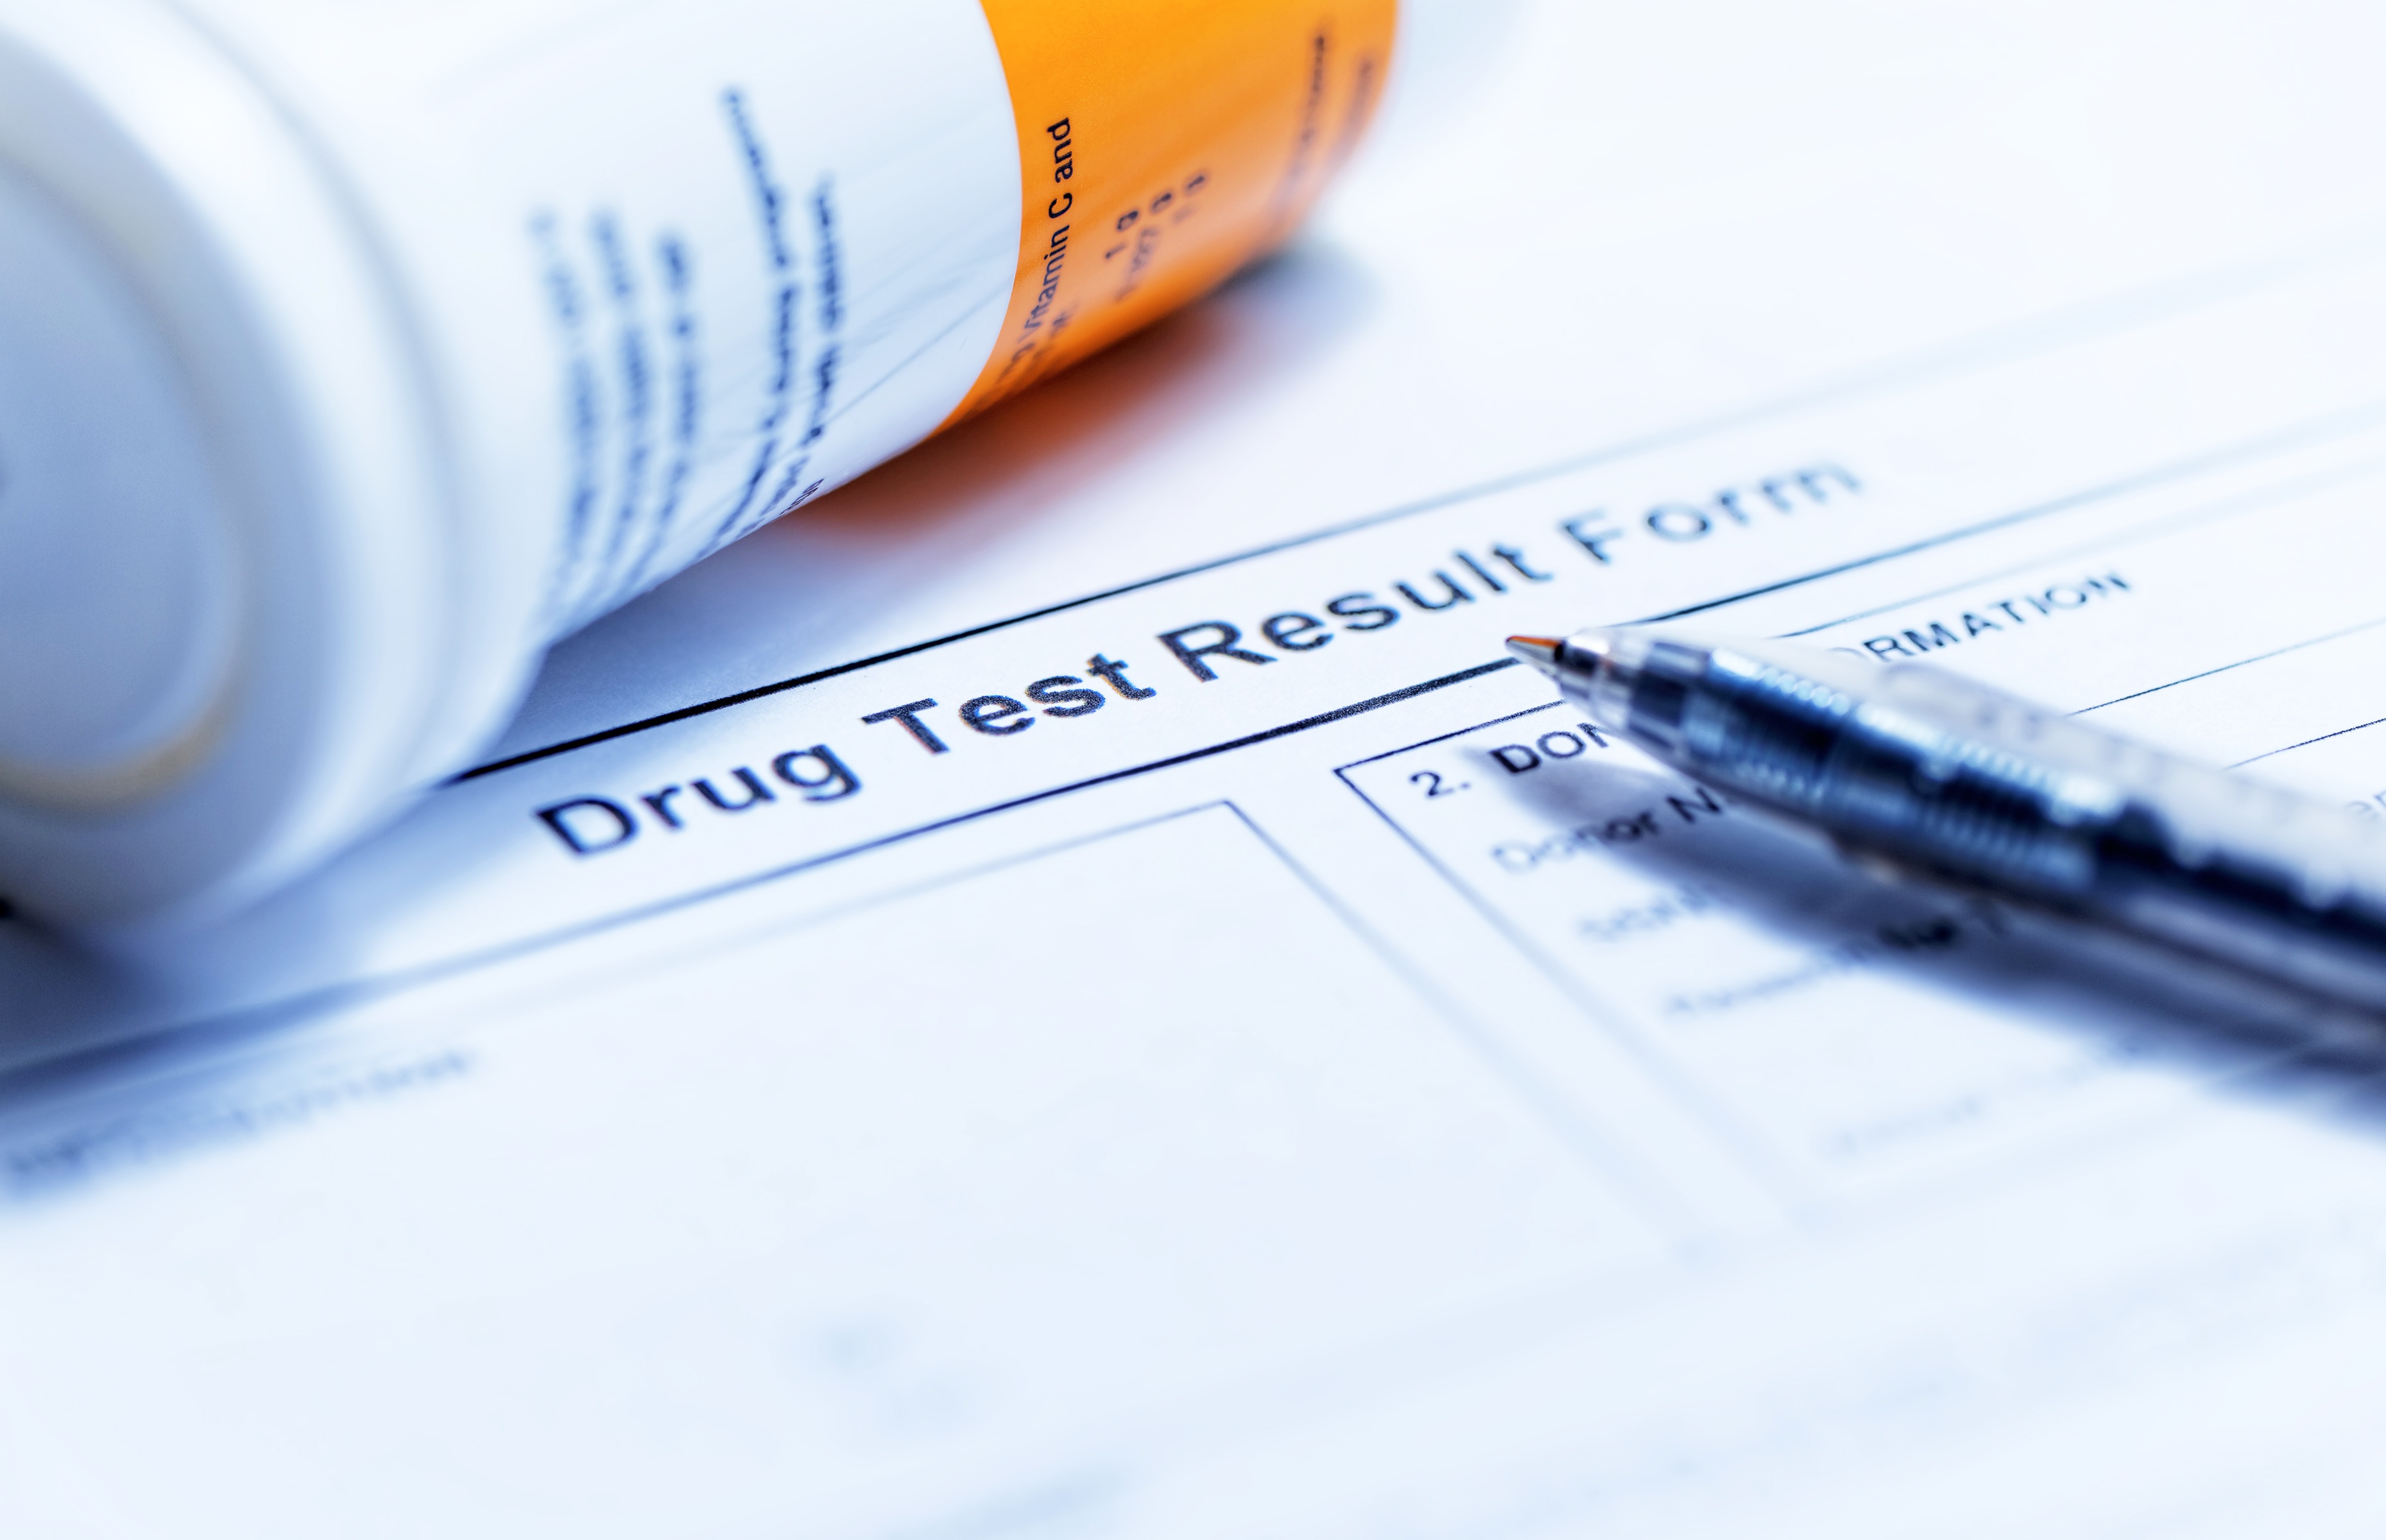 A "Drug Test Result Form" is laid out with a pen on top, adjacent to a prescription bottle.